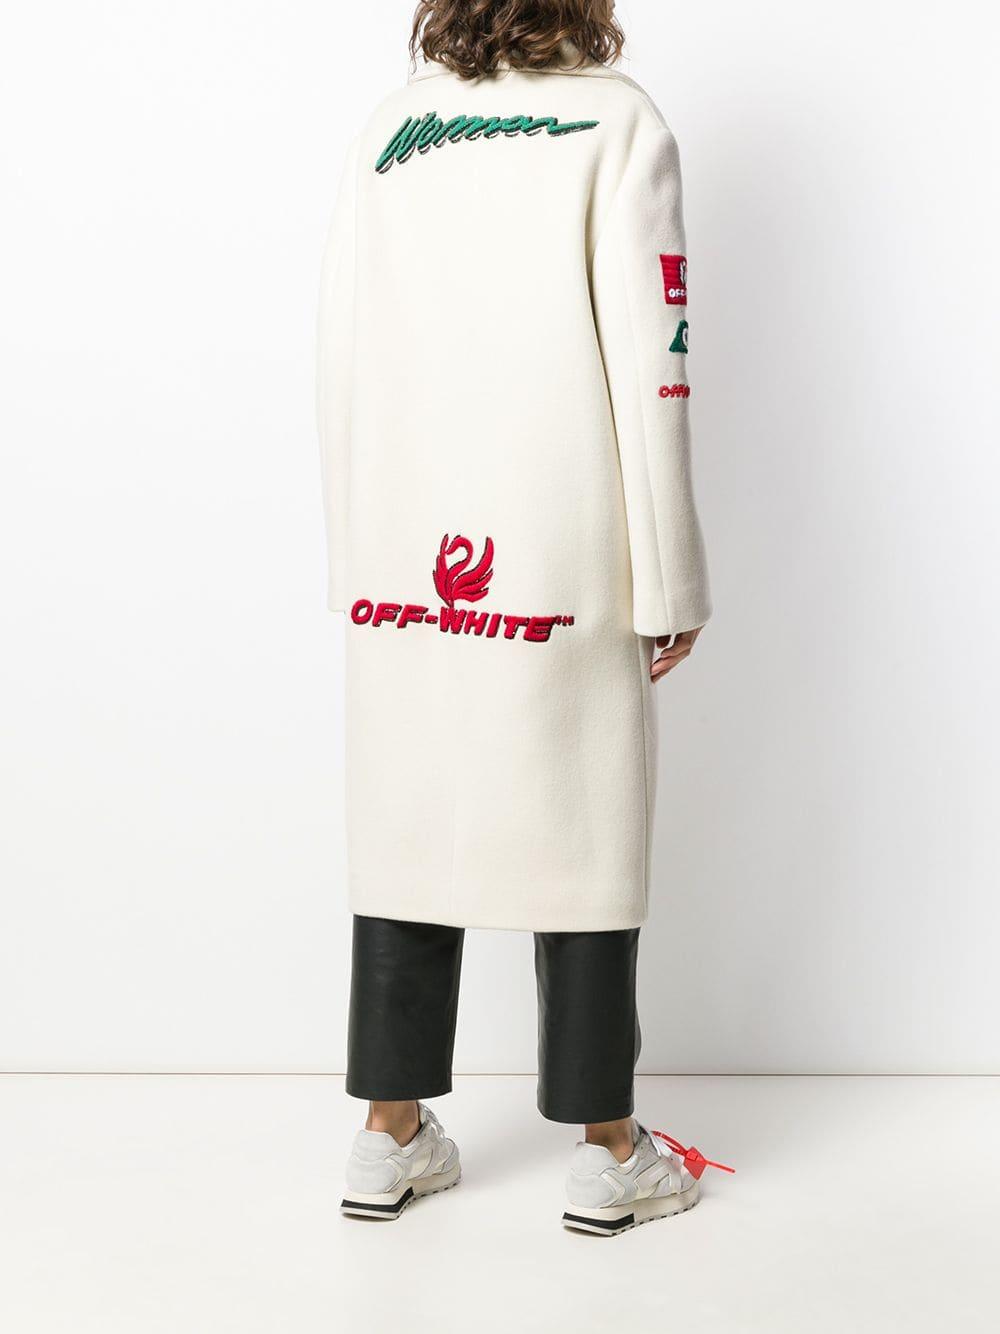 OFF WHITE Main Label Seeing Things Coat Jacket Virgil Abloh Size